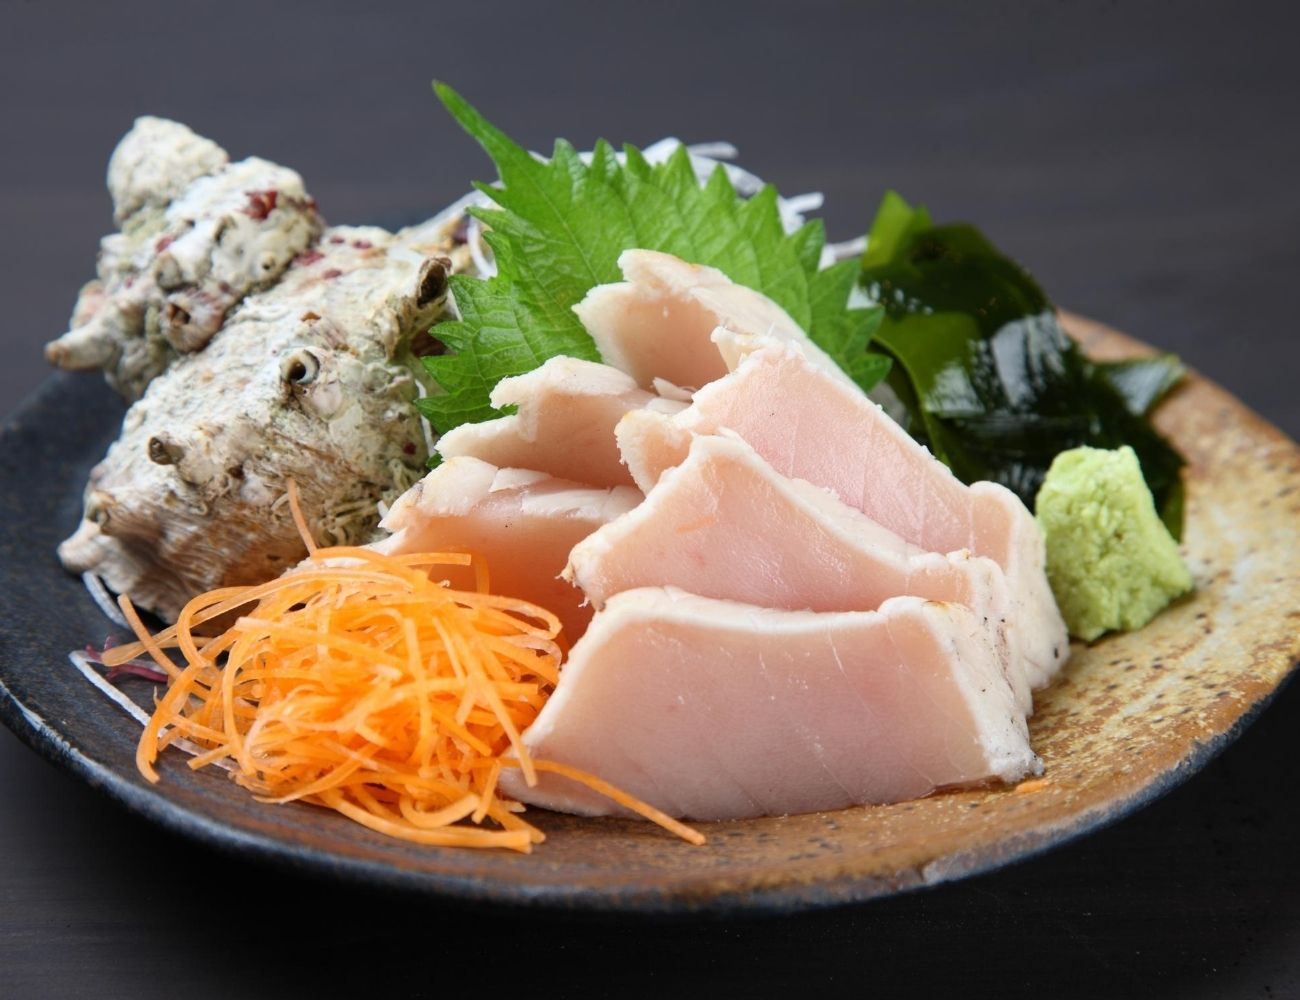 Buy Wild Albacore Tuna Loins from your local fishermen